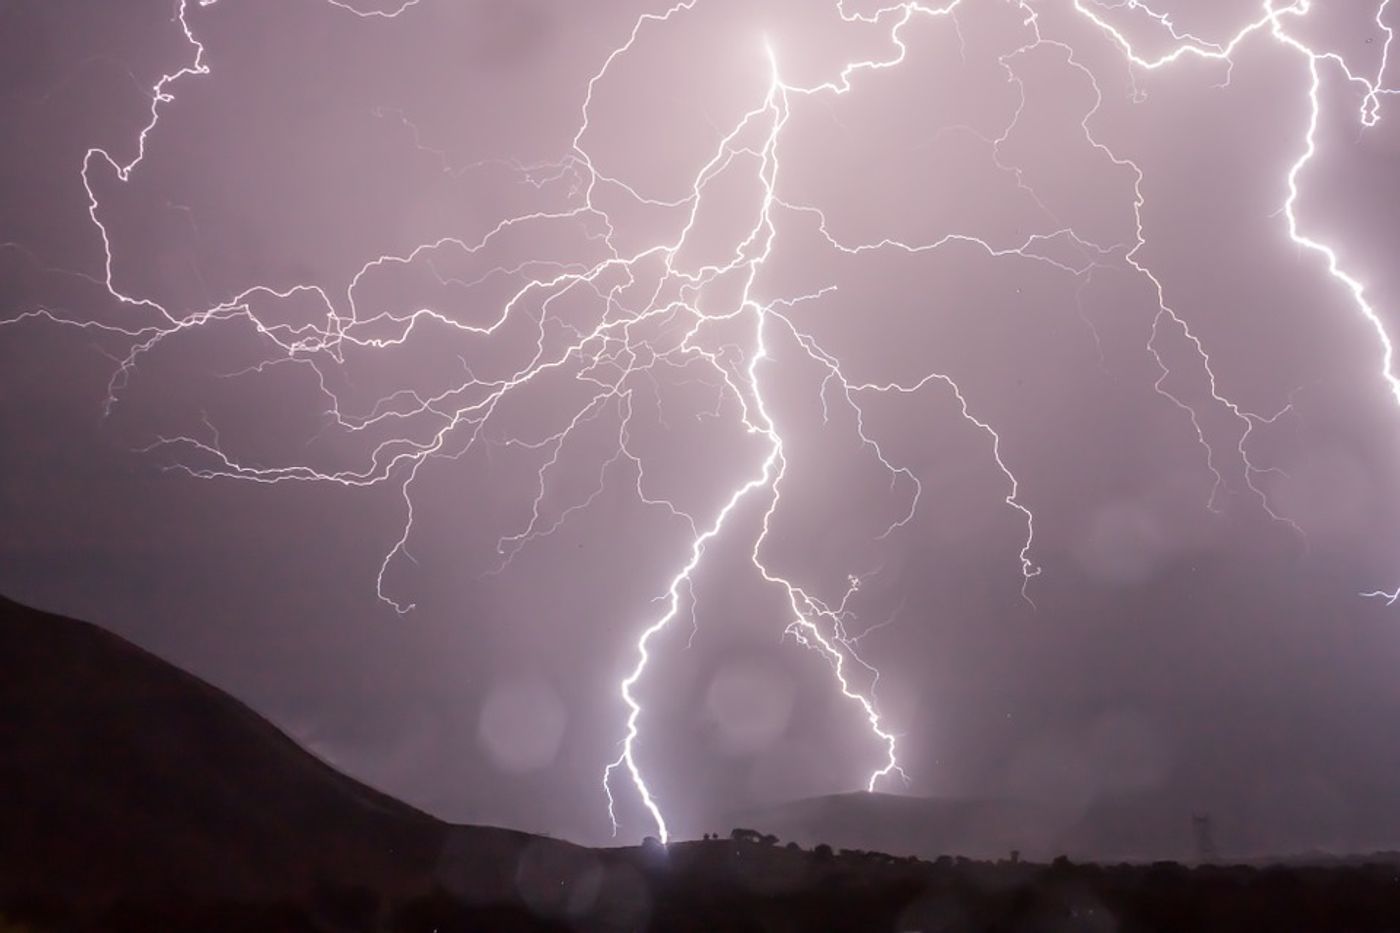 Scientists are still struggling to understand the dynamics behind superbolts. Photo: Pixabay